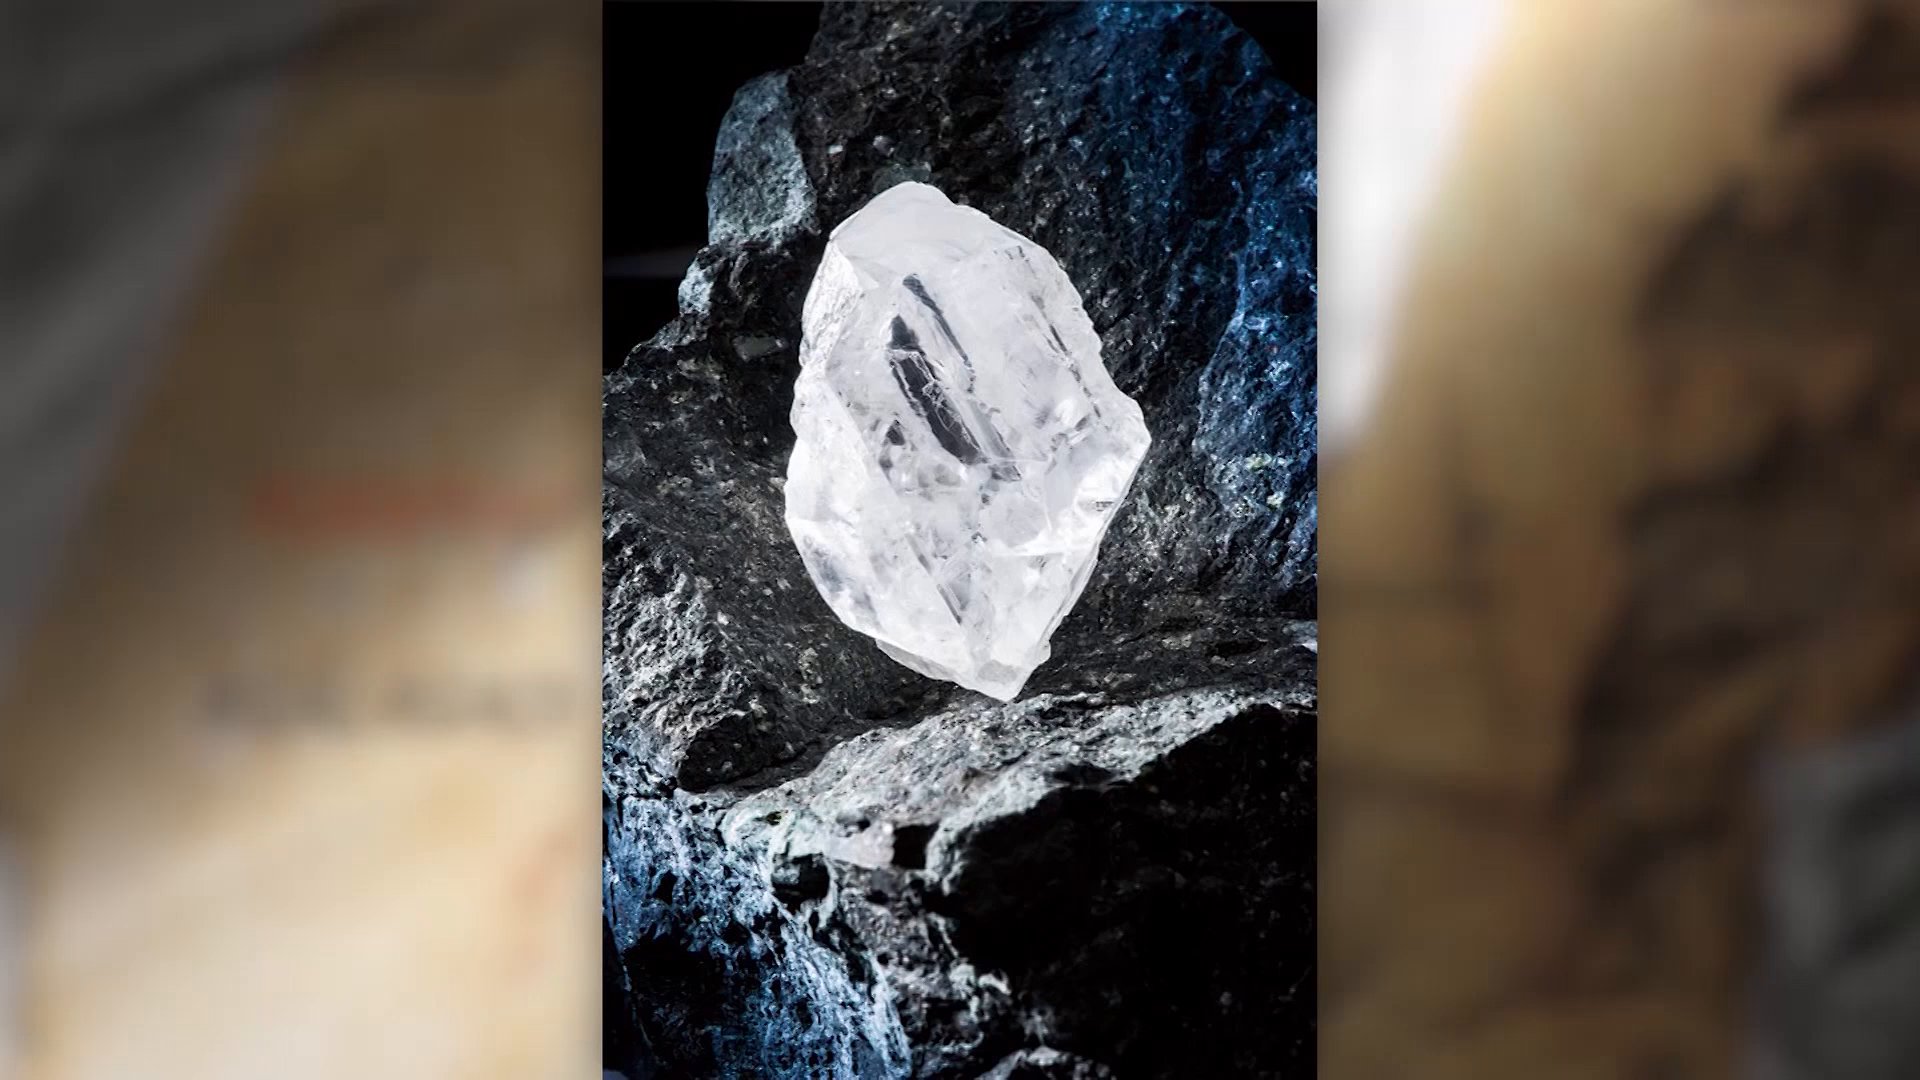 World's second largest diamond sells for $53M